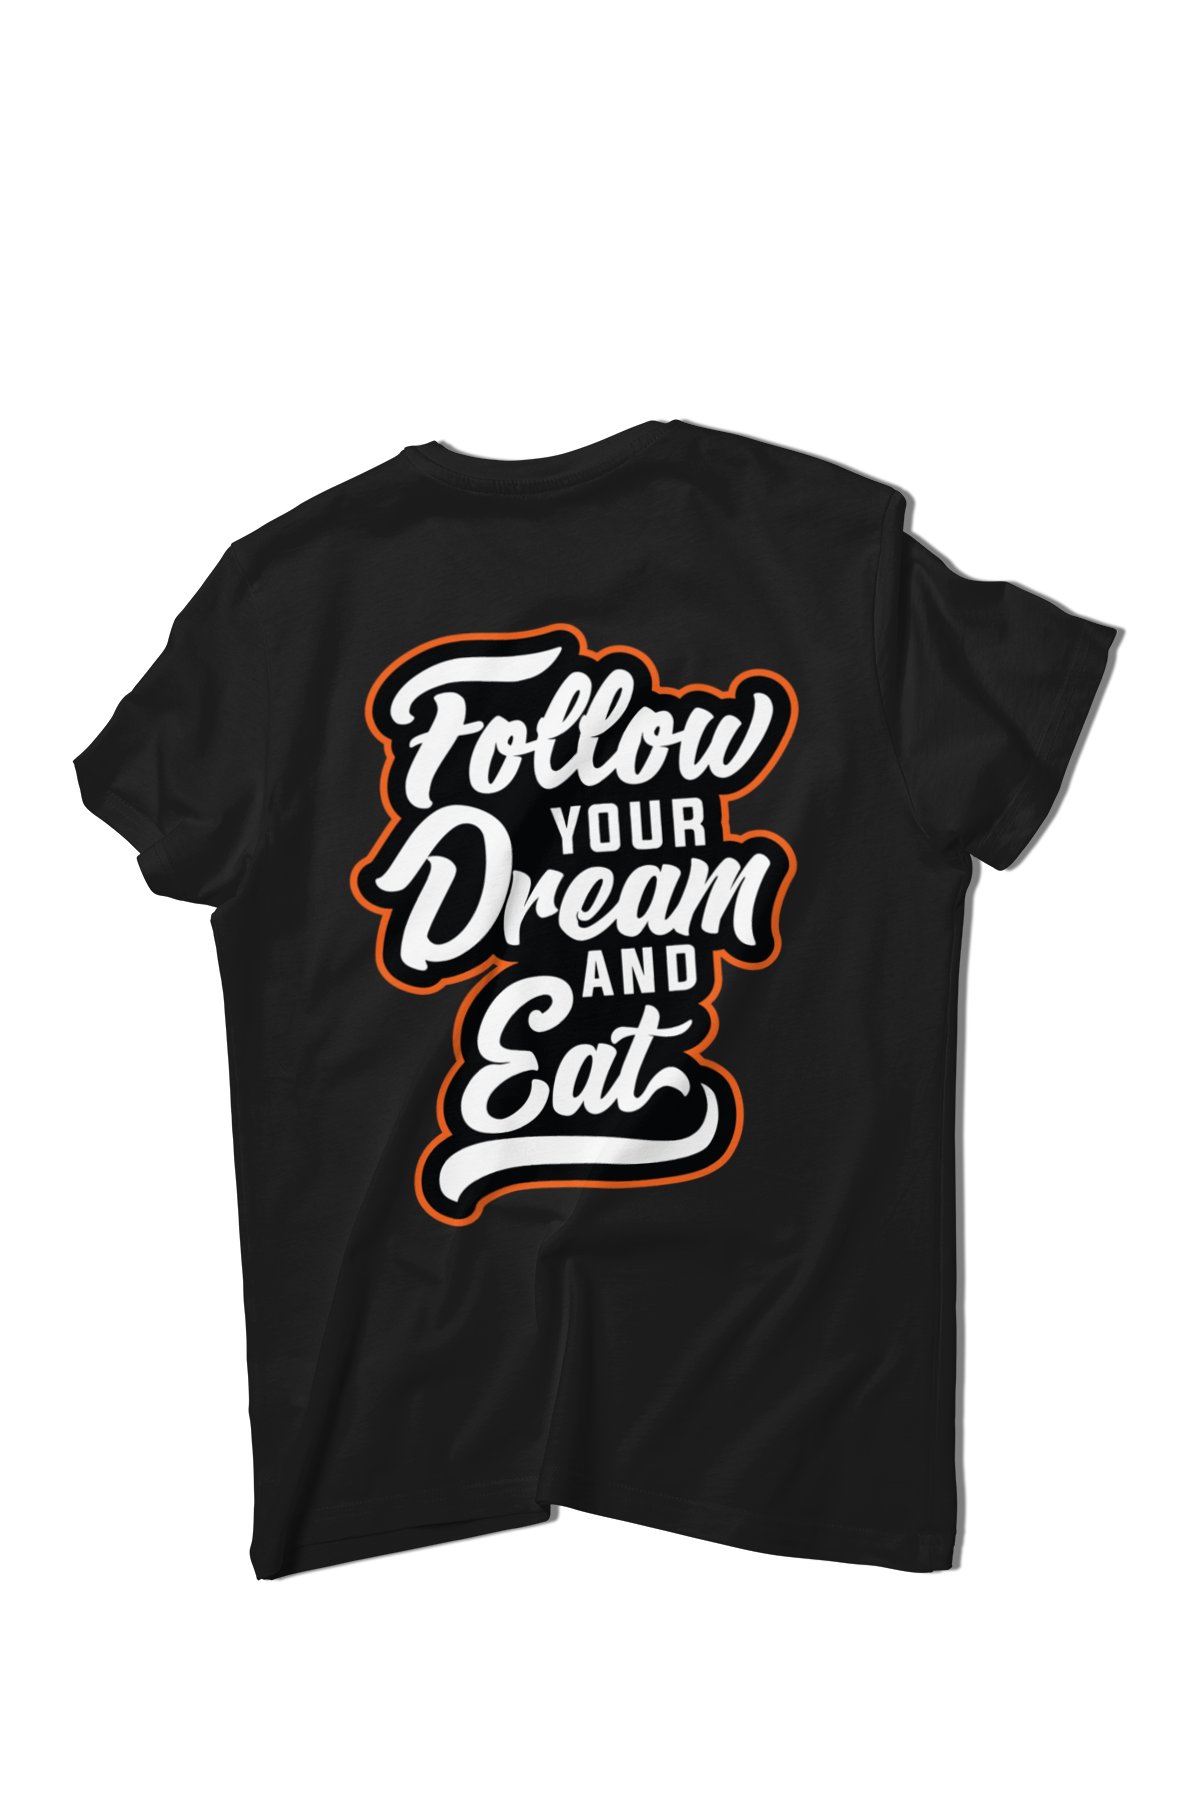 Follow Your Dream and Eat / Black T-shirt